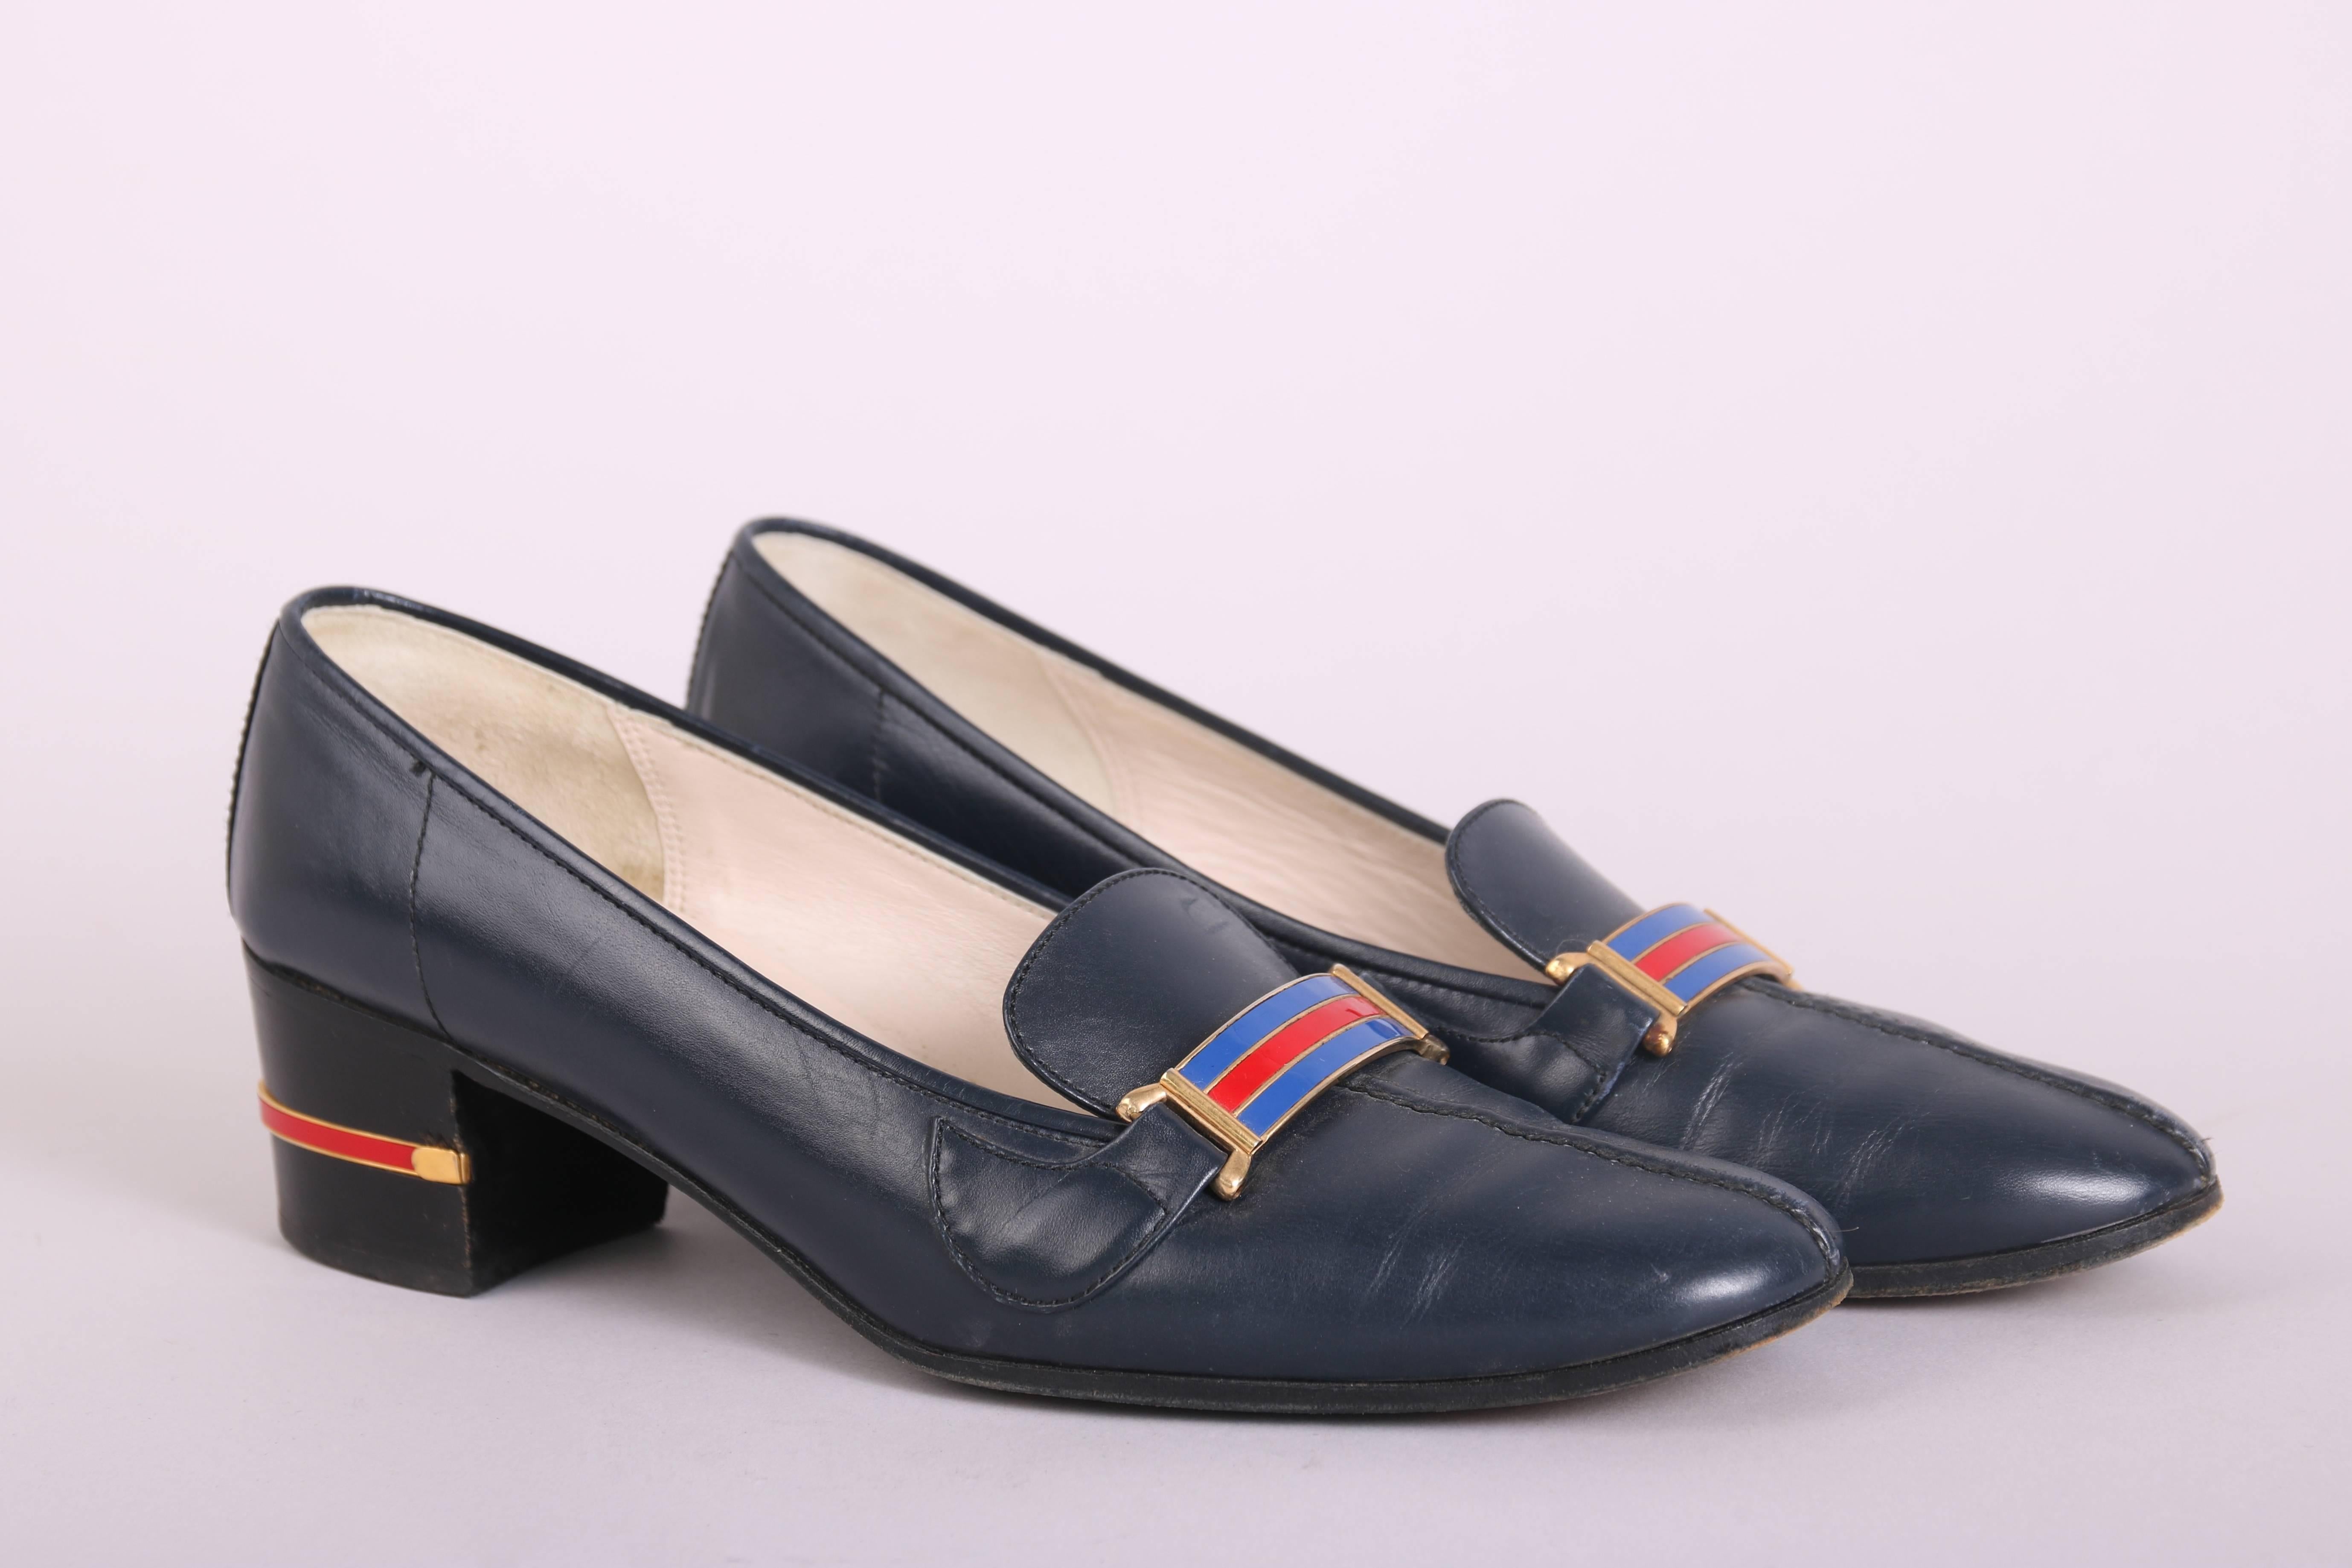 1970's Gucci navy leather heeled loafers with gold tone hardware and a red & blue enameled bar at the top. Leather is quite soft and In very good condition with some extremely light scuffs at the toe and wear at the bottom of the soles ***please